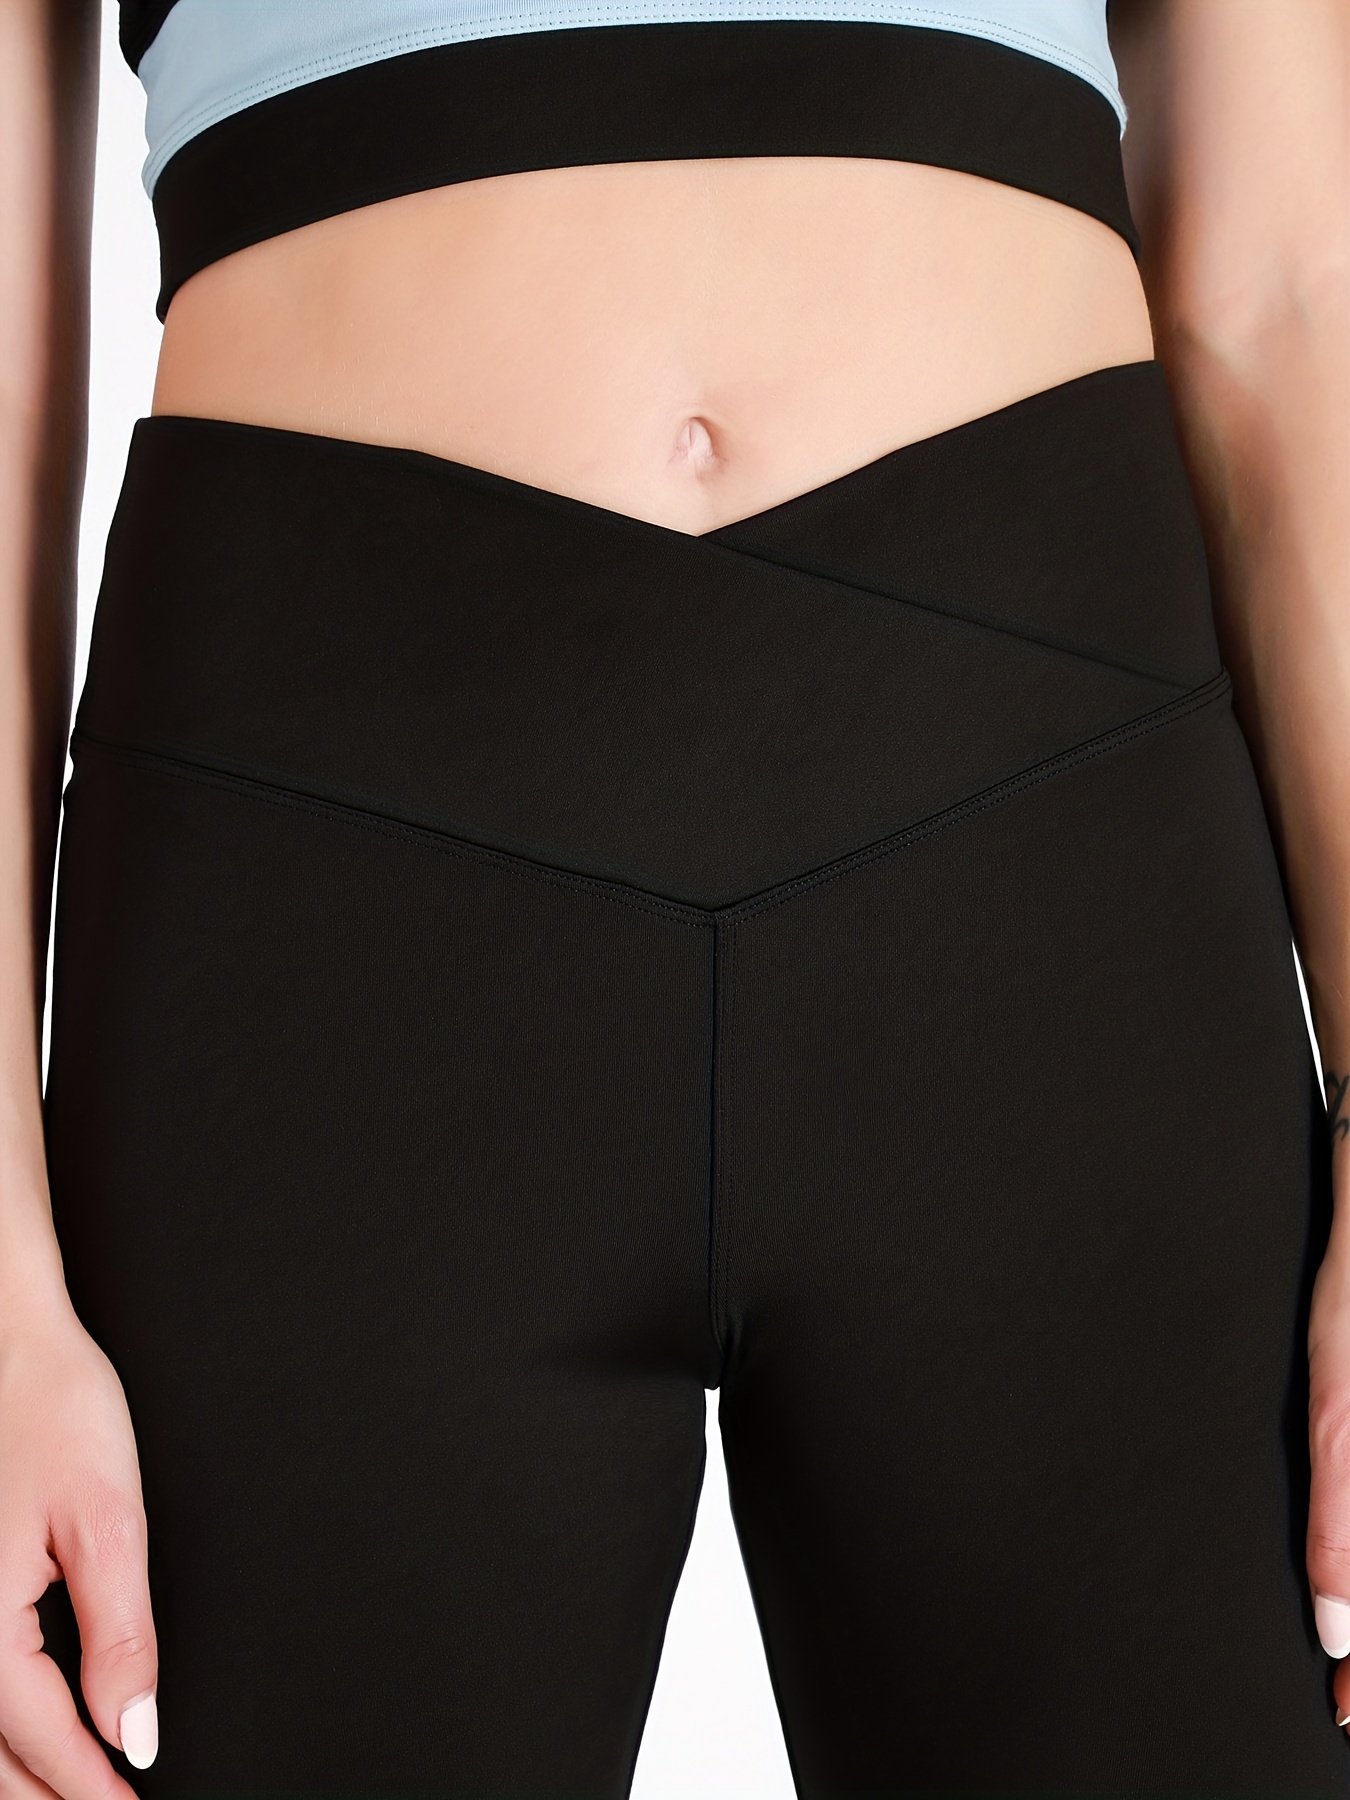  Womens Crossover Leggings High Waisted Tummy Control